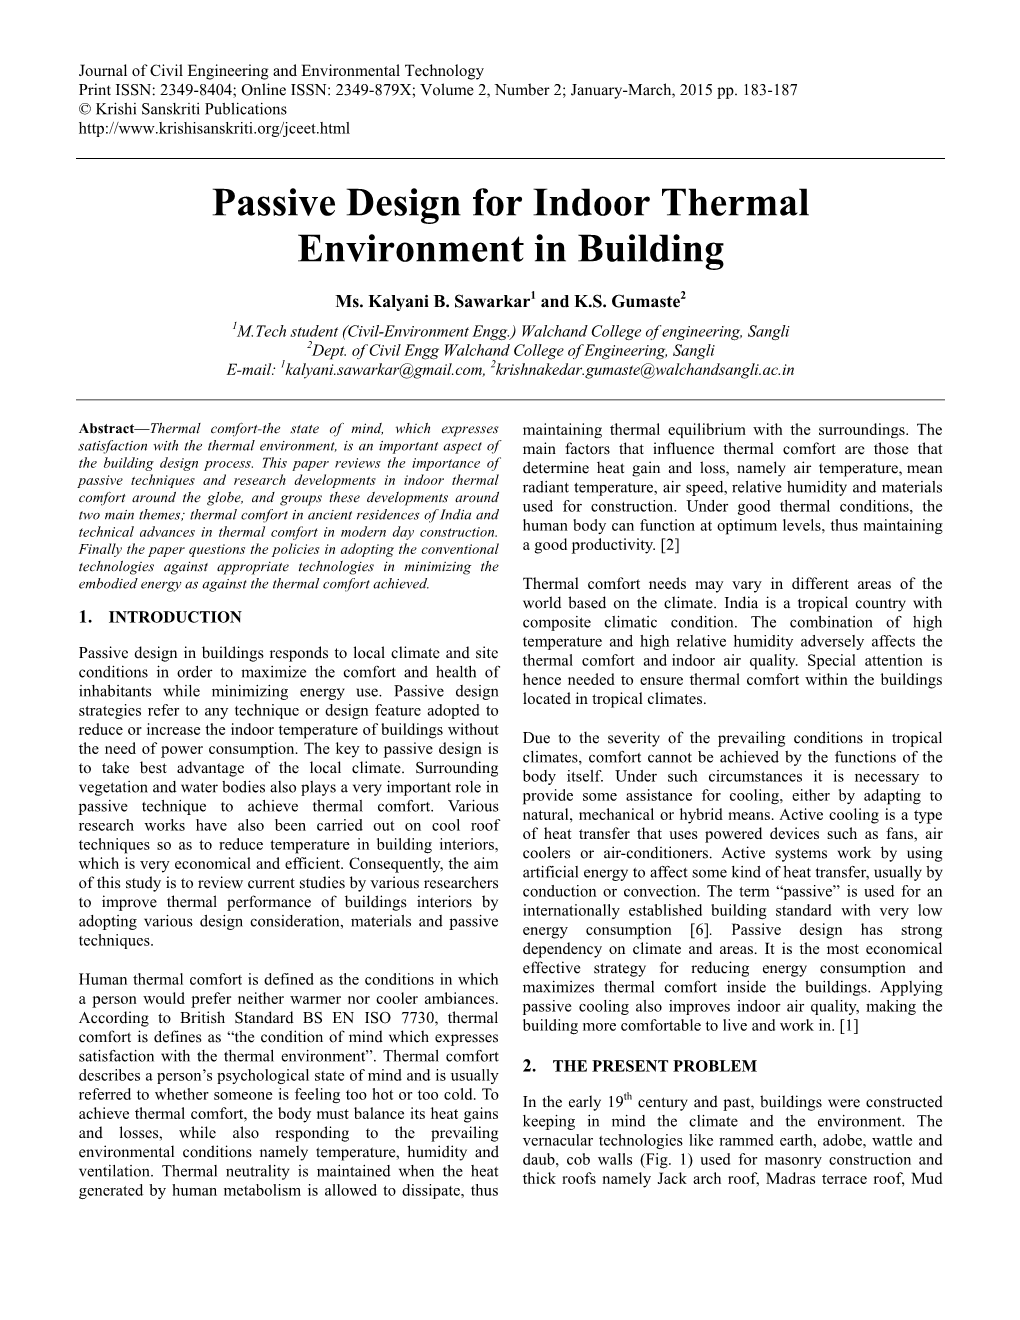 Passive Design for Indoor Thermal Environment in Building